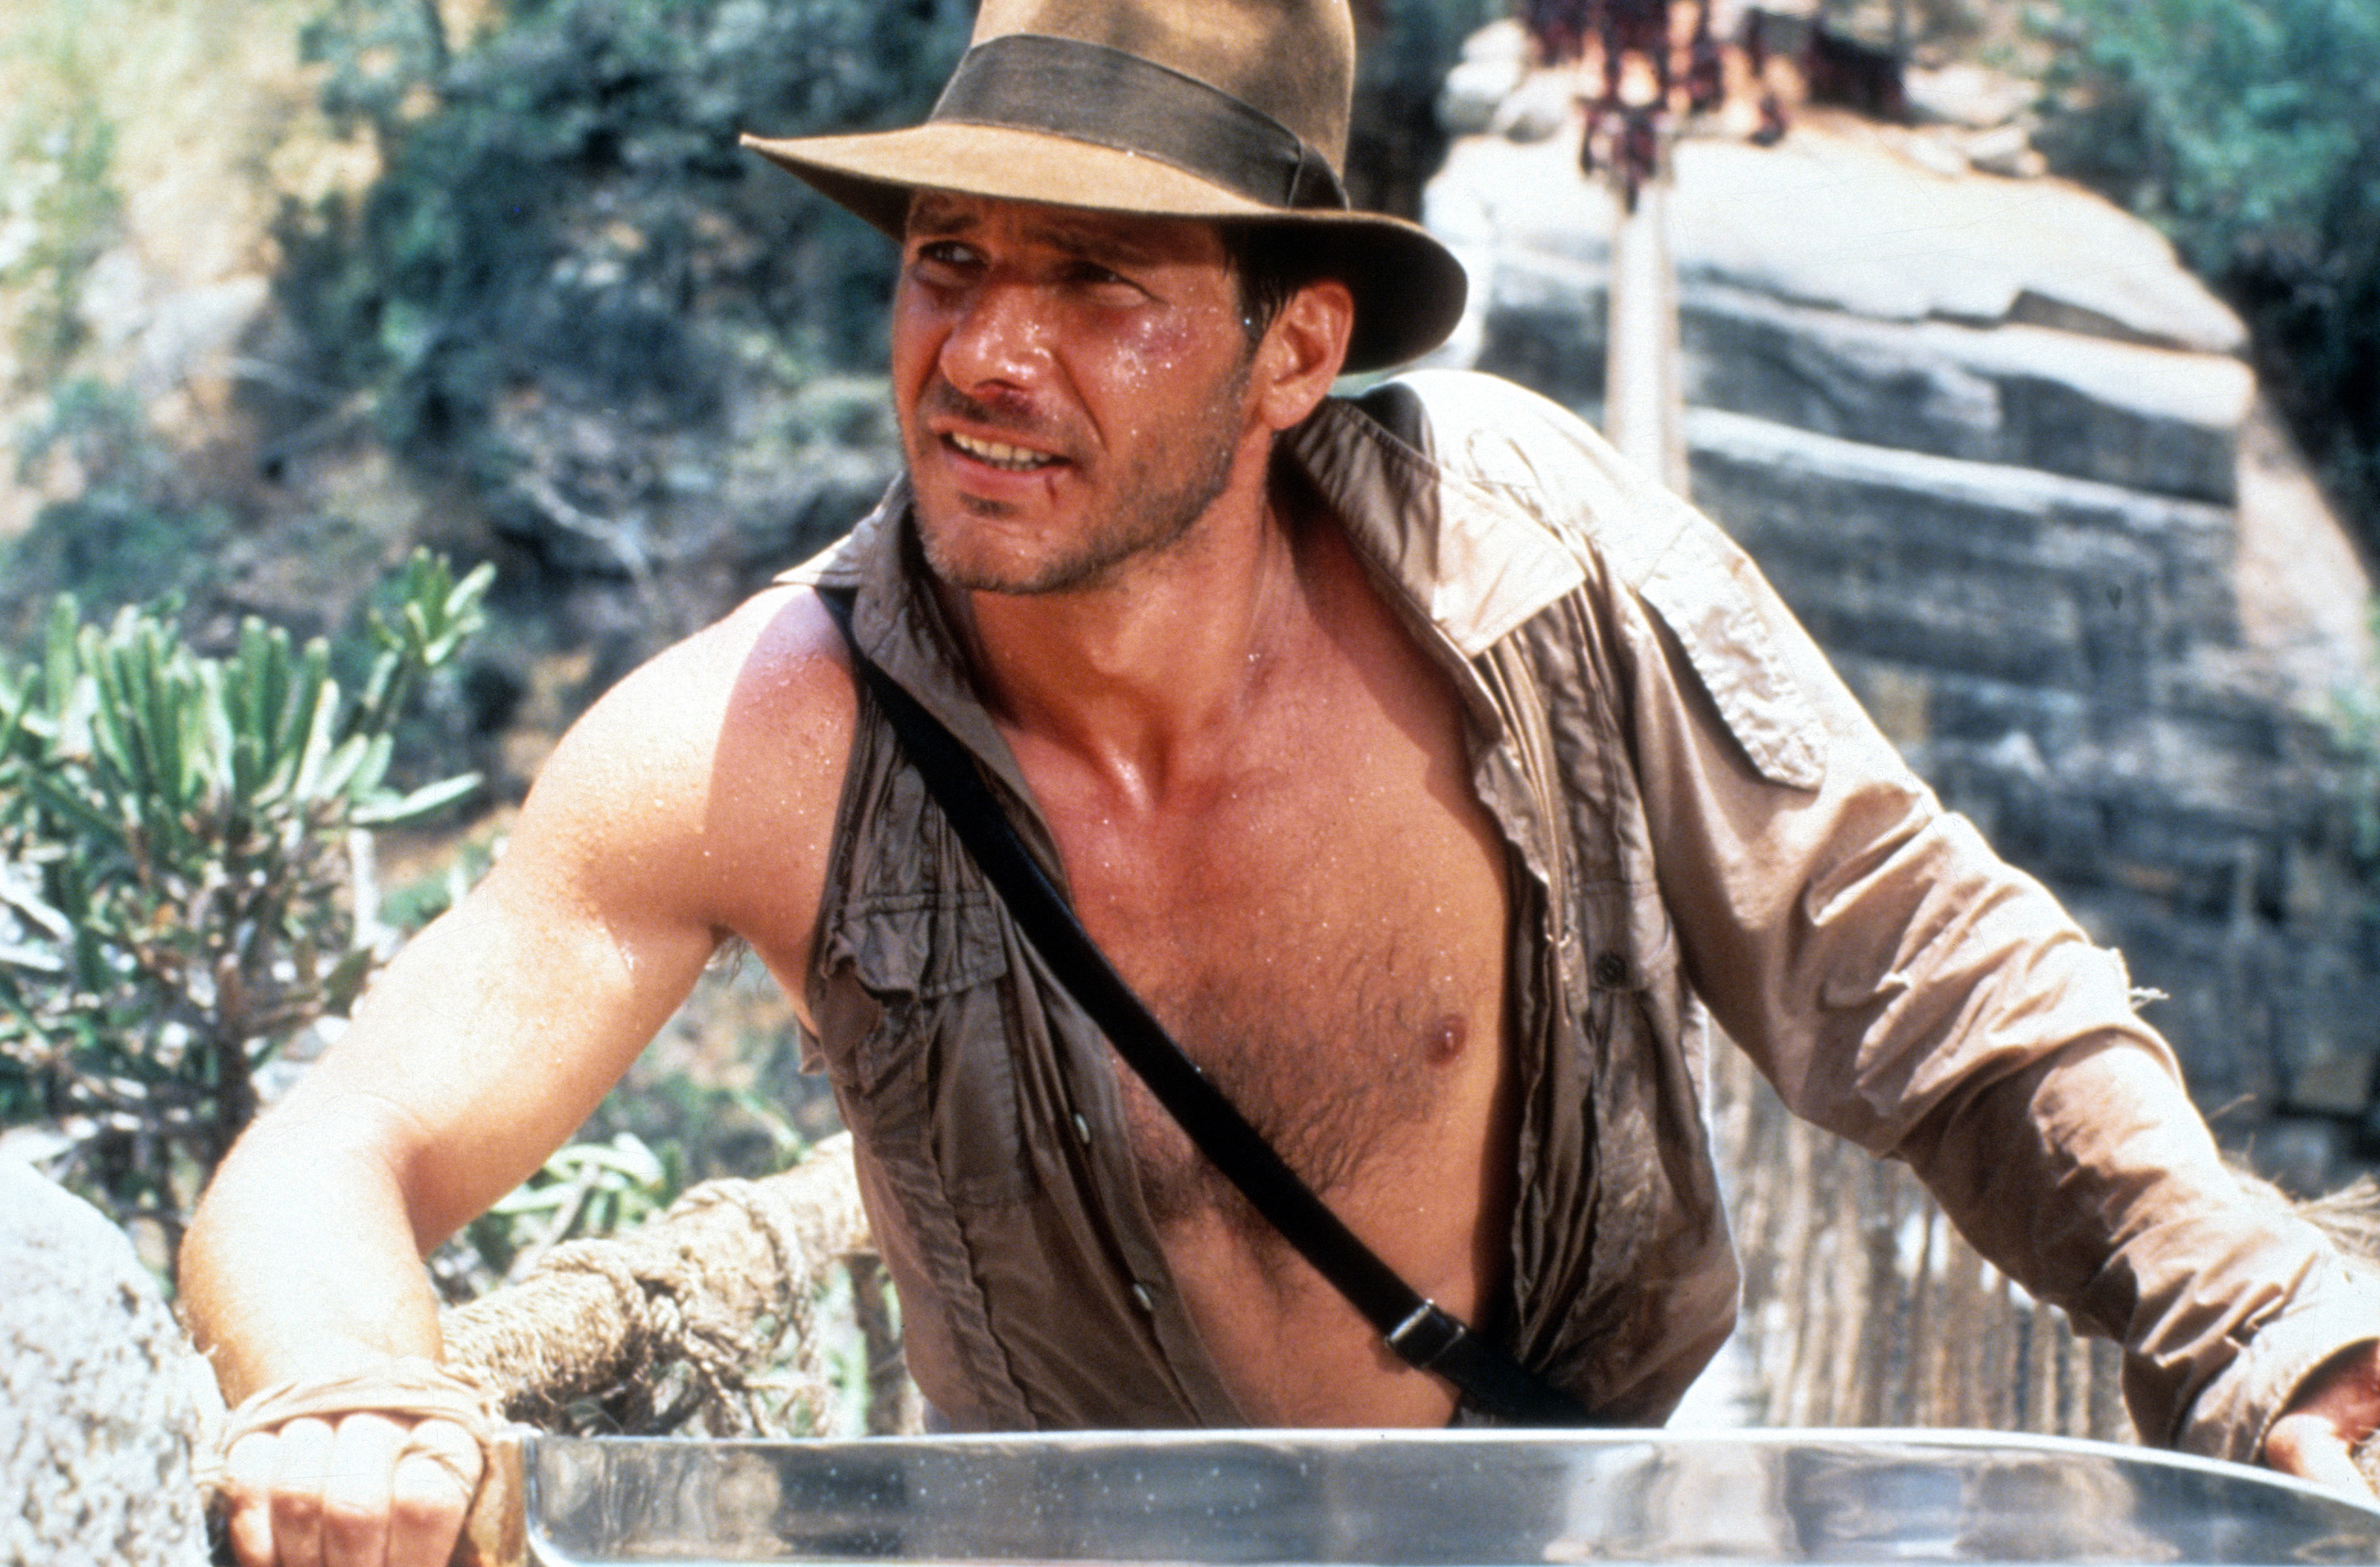 Harrison Ford in a scene from the film 'Indiana Jones And The Temple Of Doom' of 1984